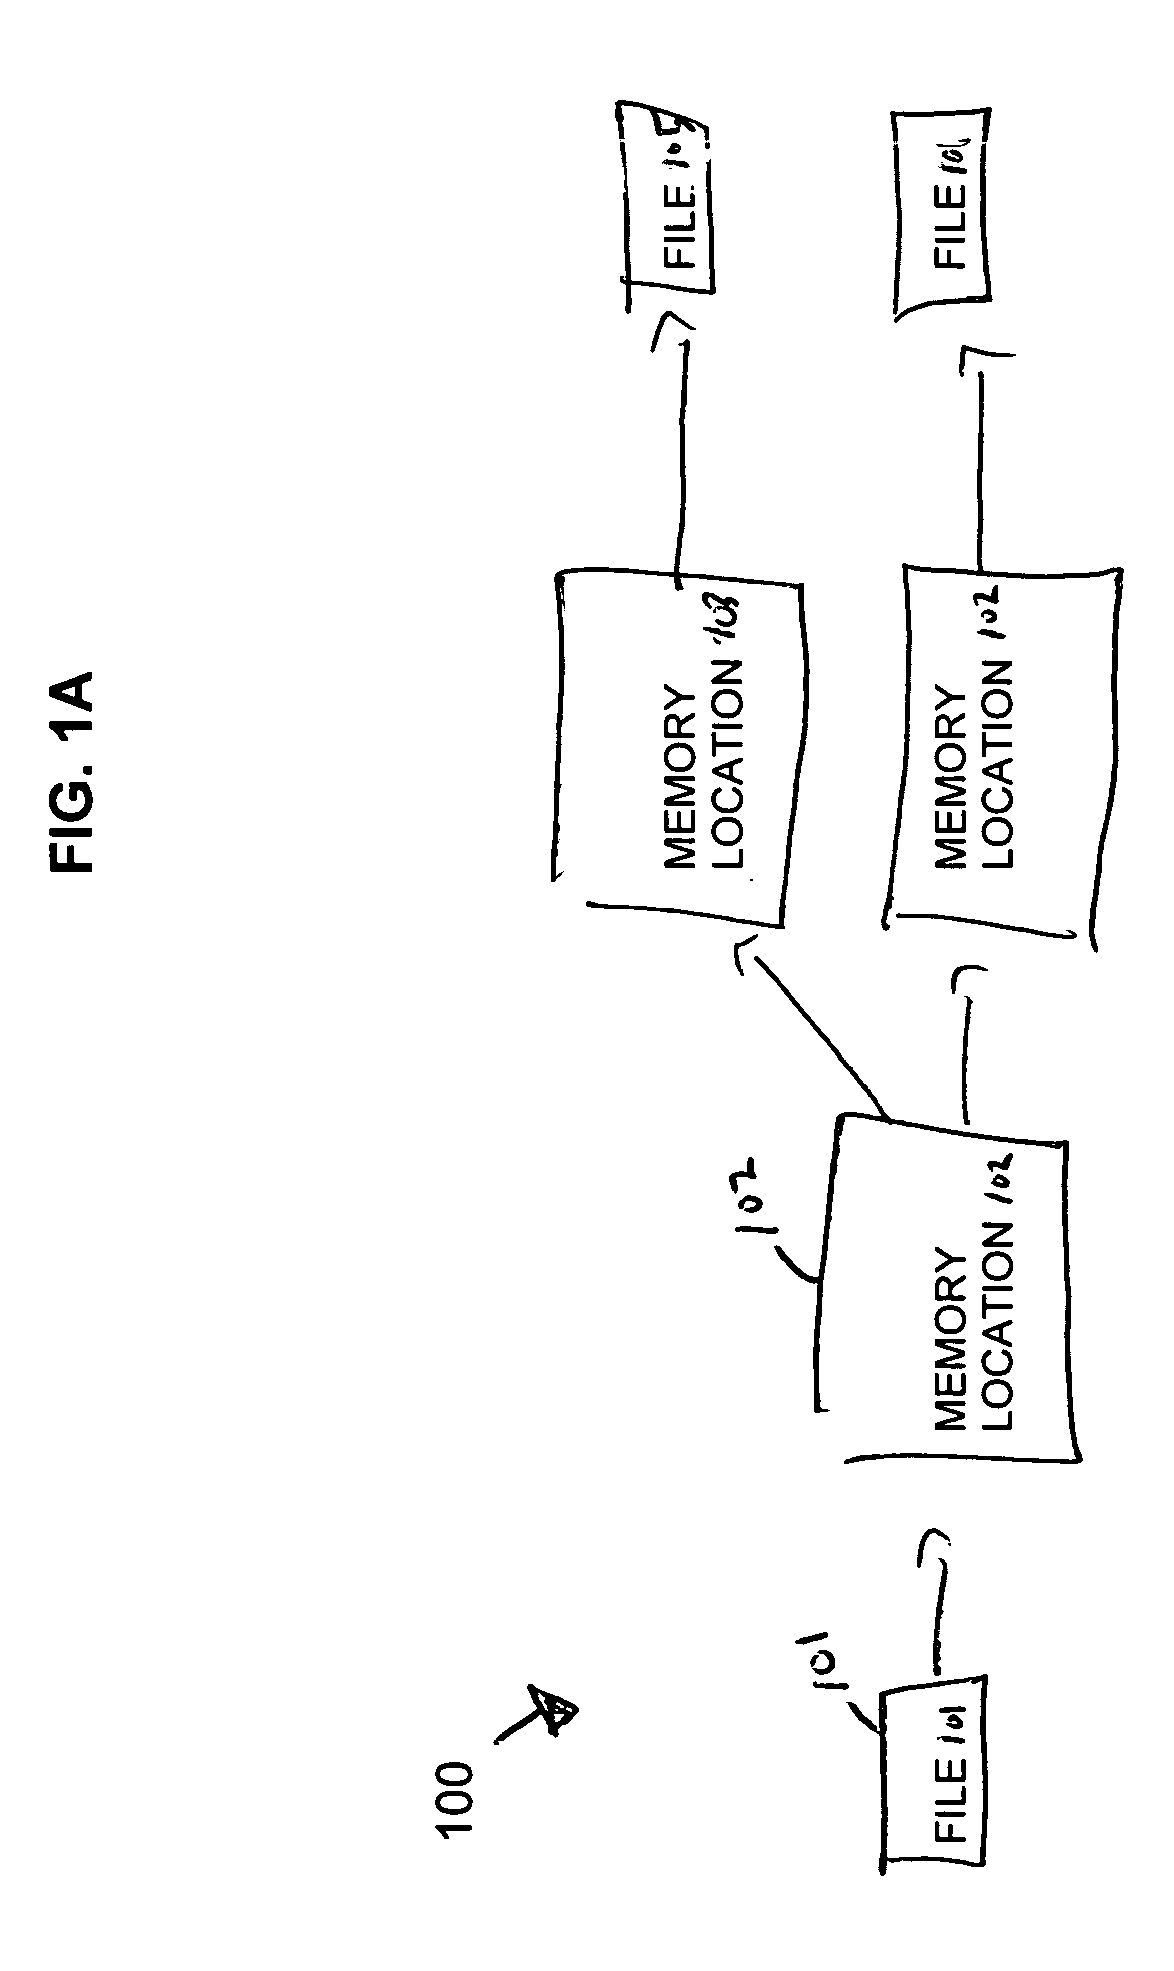 System, method and program product for detecting malicious software